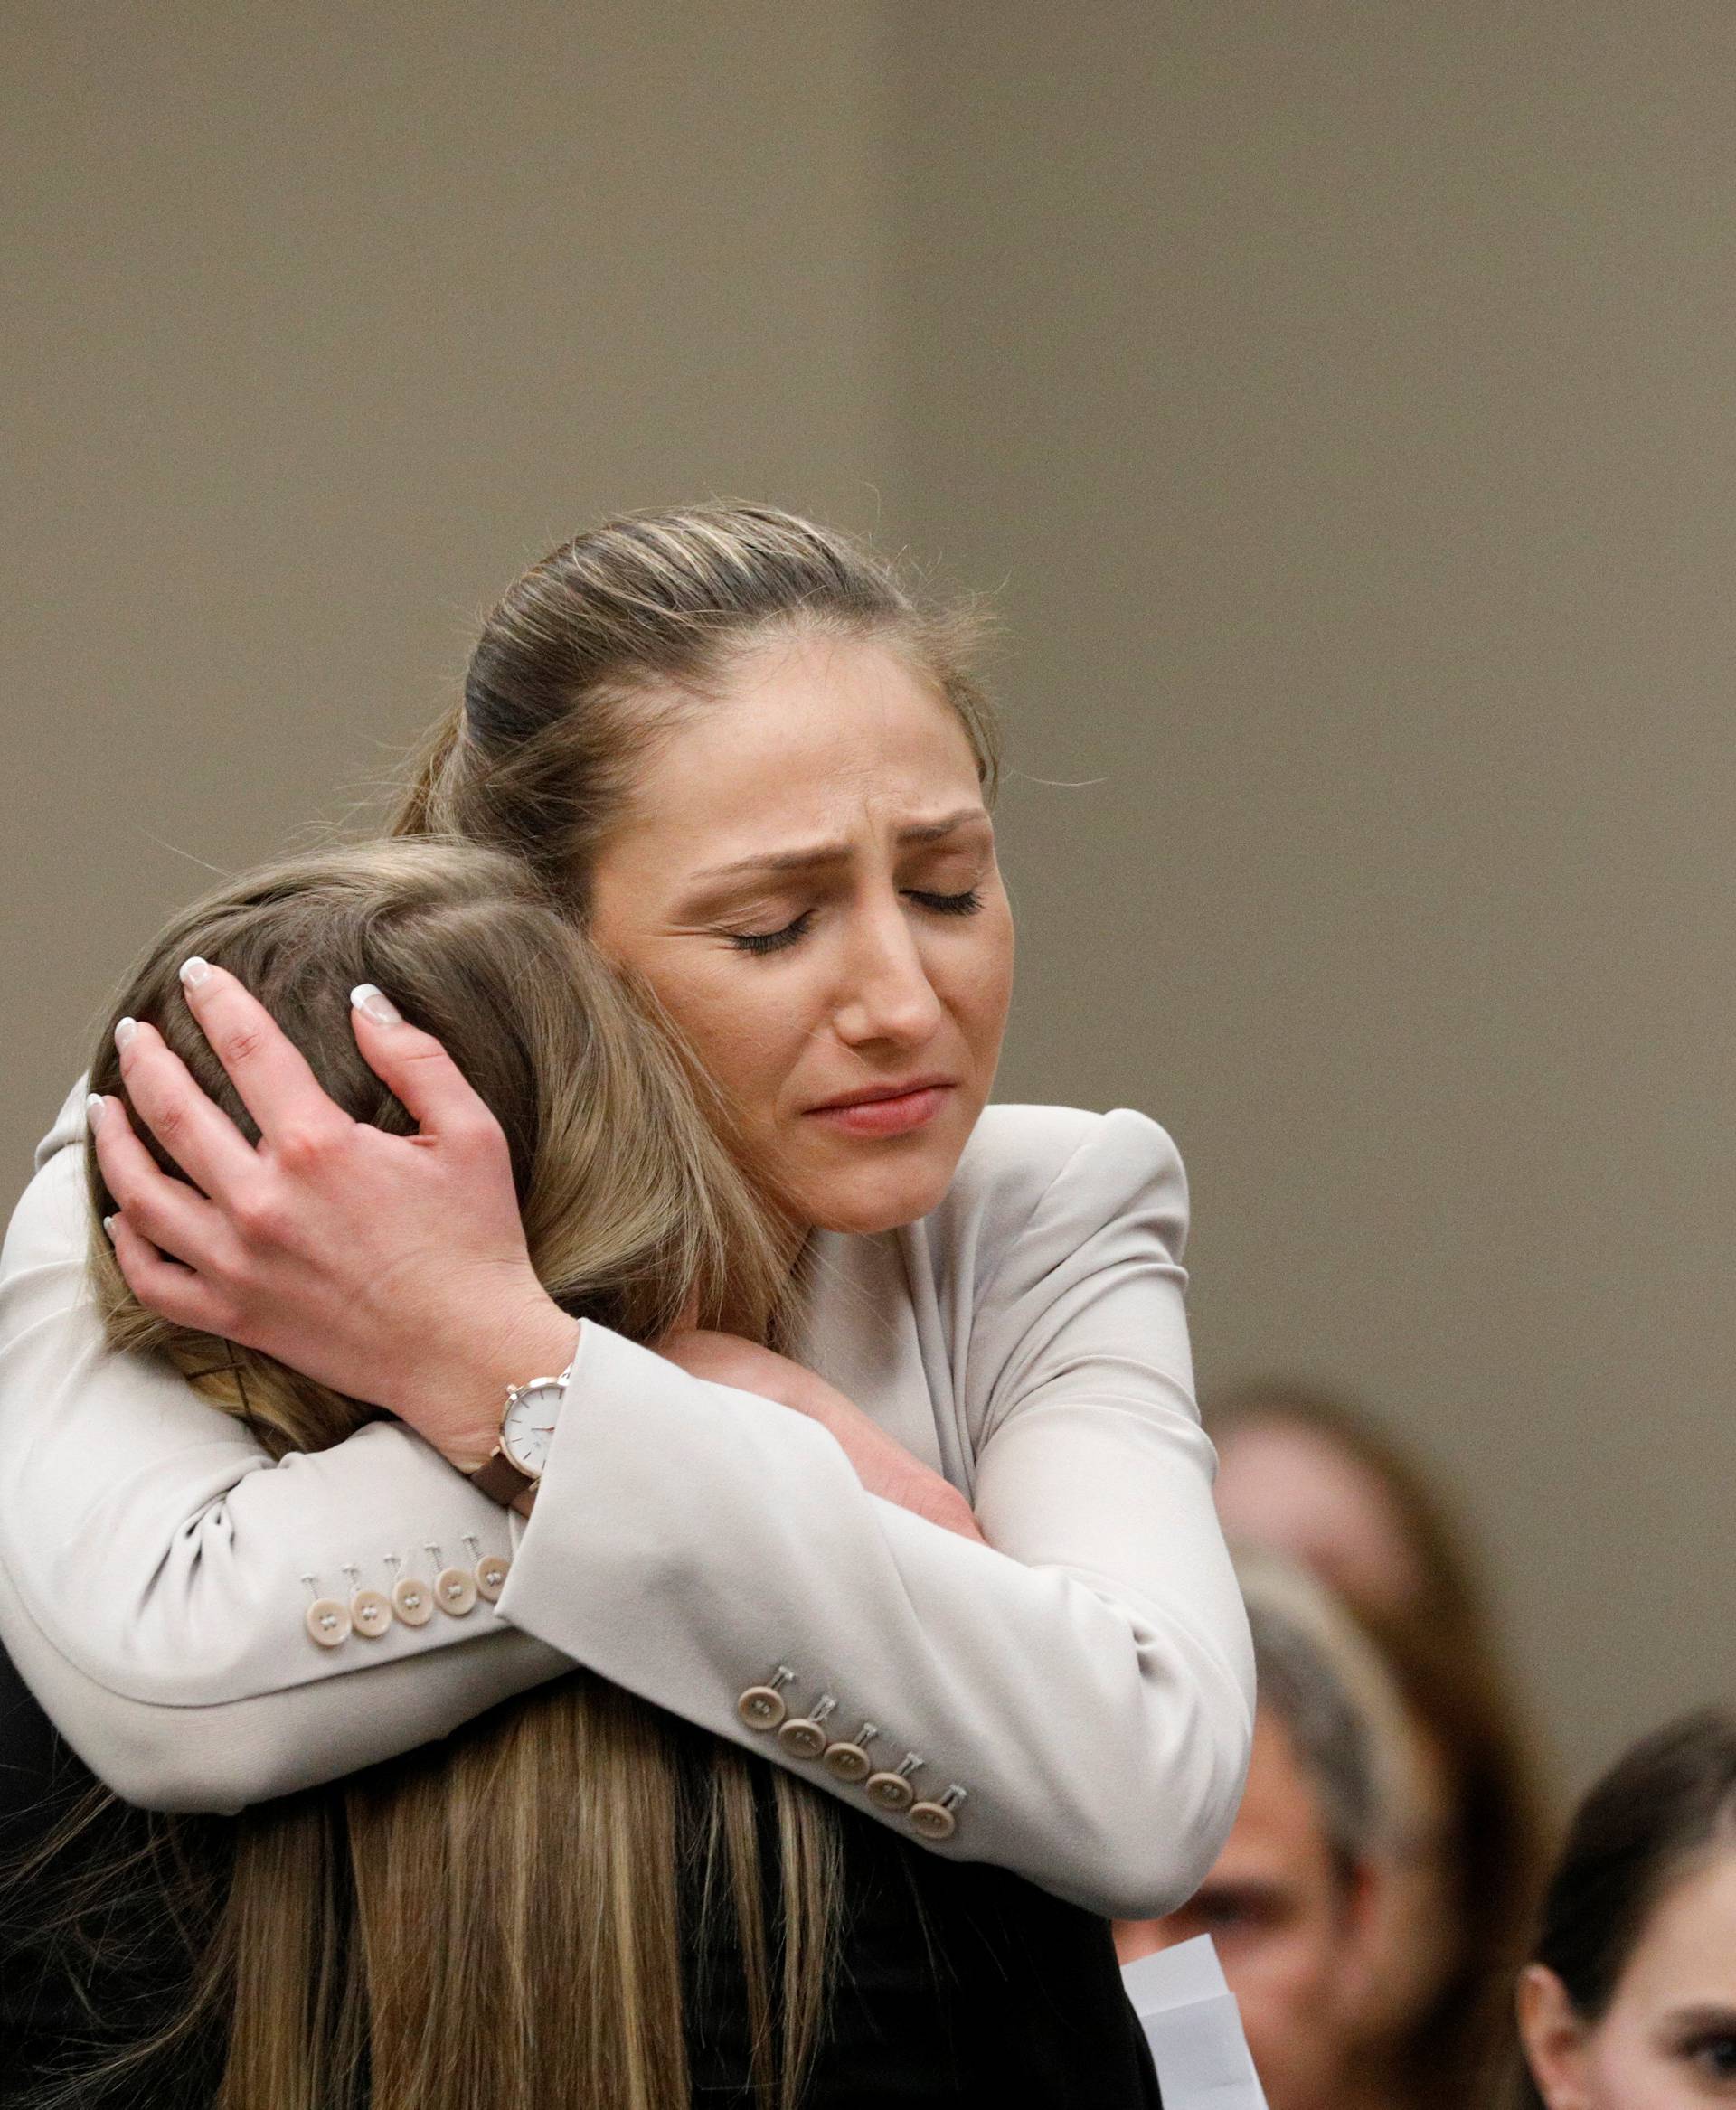 Victim Emily Morales is hugged after speaking at the sentencing hearing for Larry Nassar, a former team USA Gymnastics doctor who pleaded guilty in November 2017 to sexual assault charges, in Lansing, Michigan